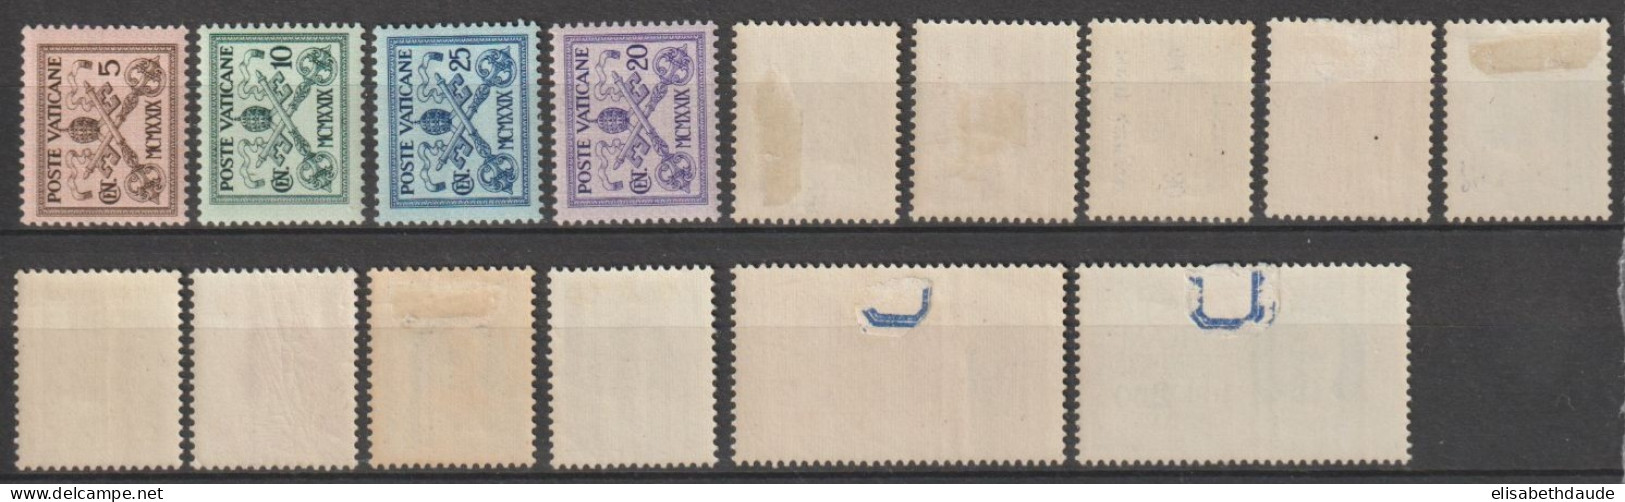 VATICAN - 1929 - ANNEE COMPLETE AVEC EXPRES ! - YVERT 26/38 + EXP 1/2 * MH - COTE = 105 EUR. - Unused Stamps